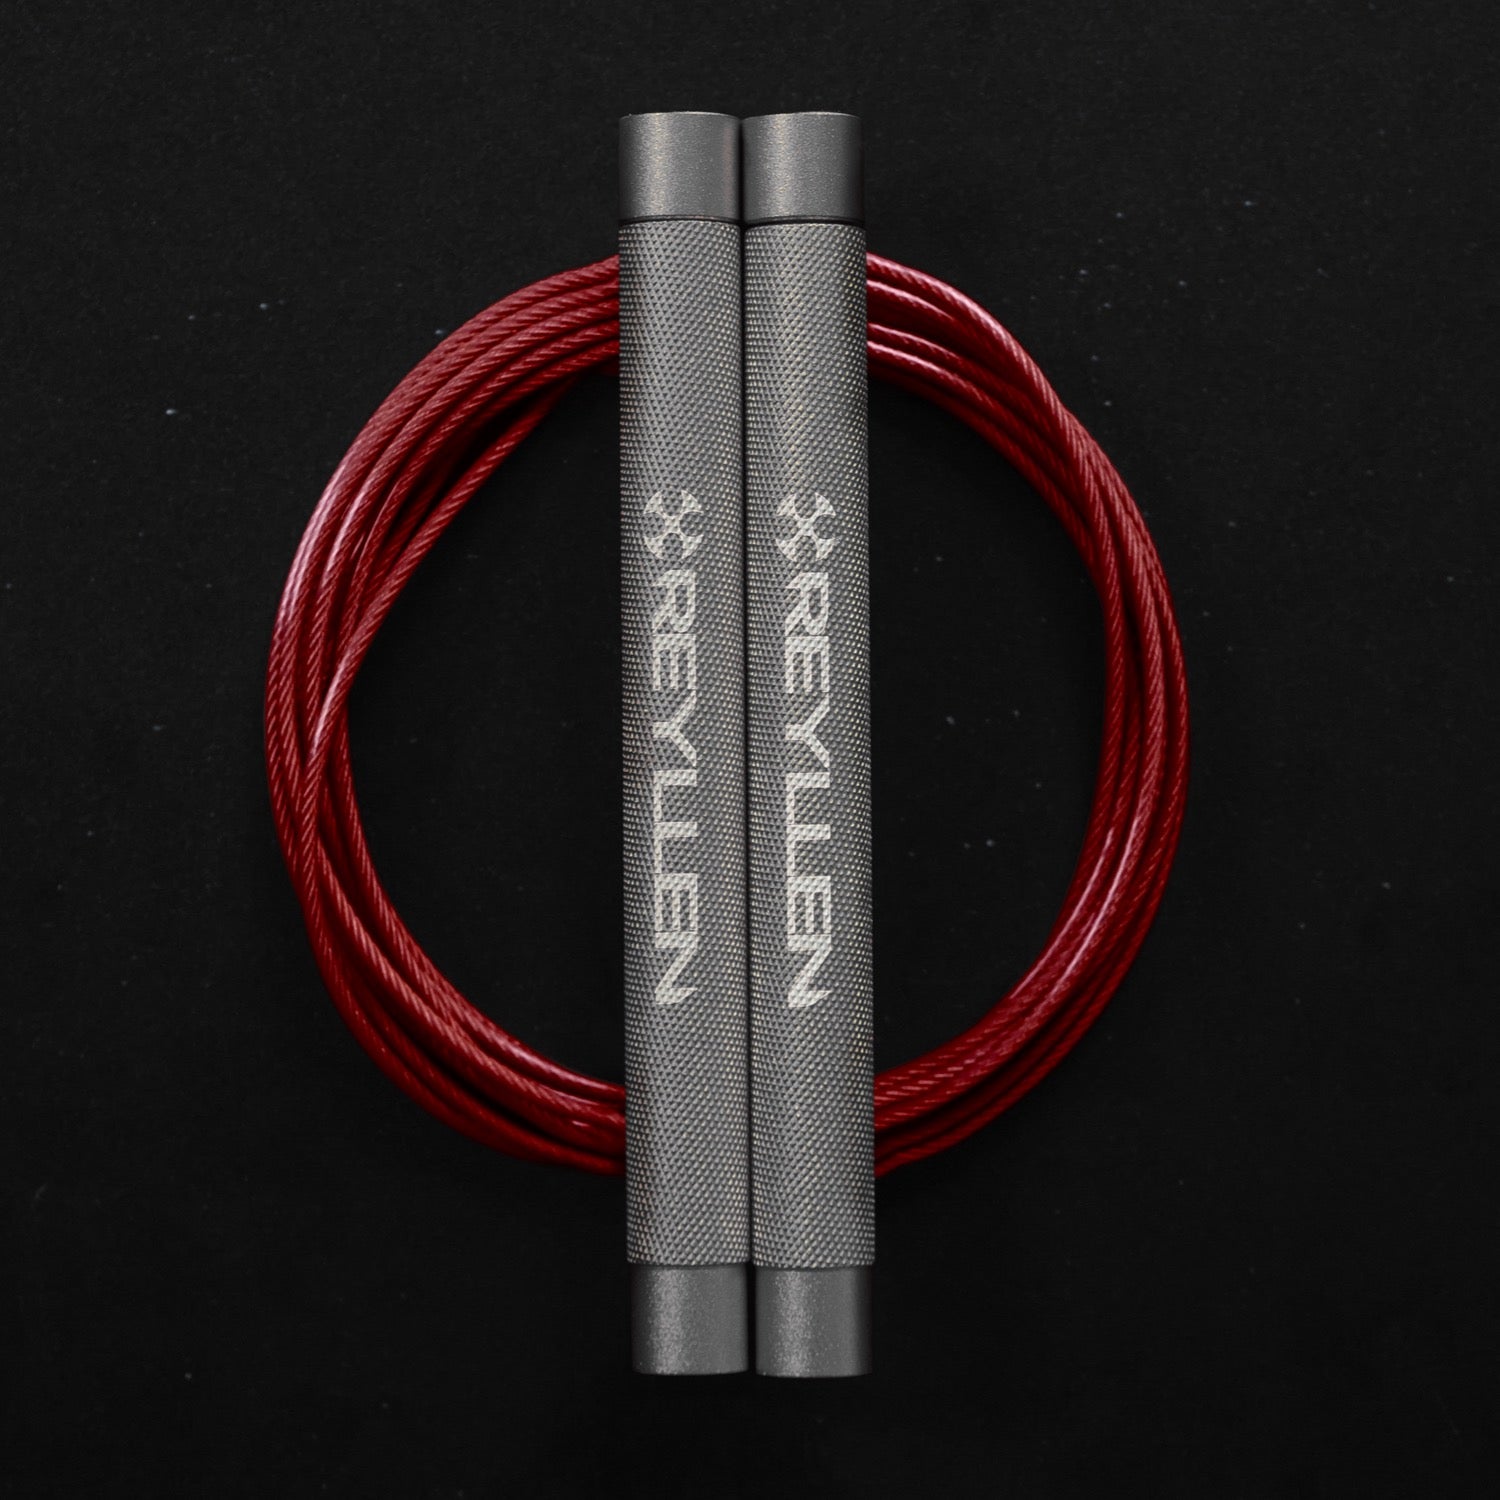 Reyllen Flare Mx Speed Skipping Jump Rope - Aluminium Handles - silver with red pvc cable